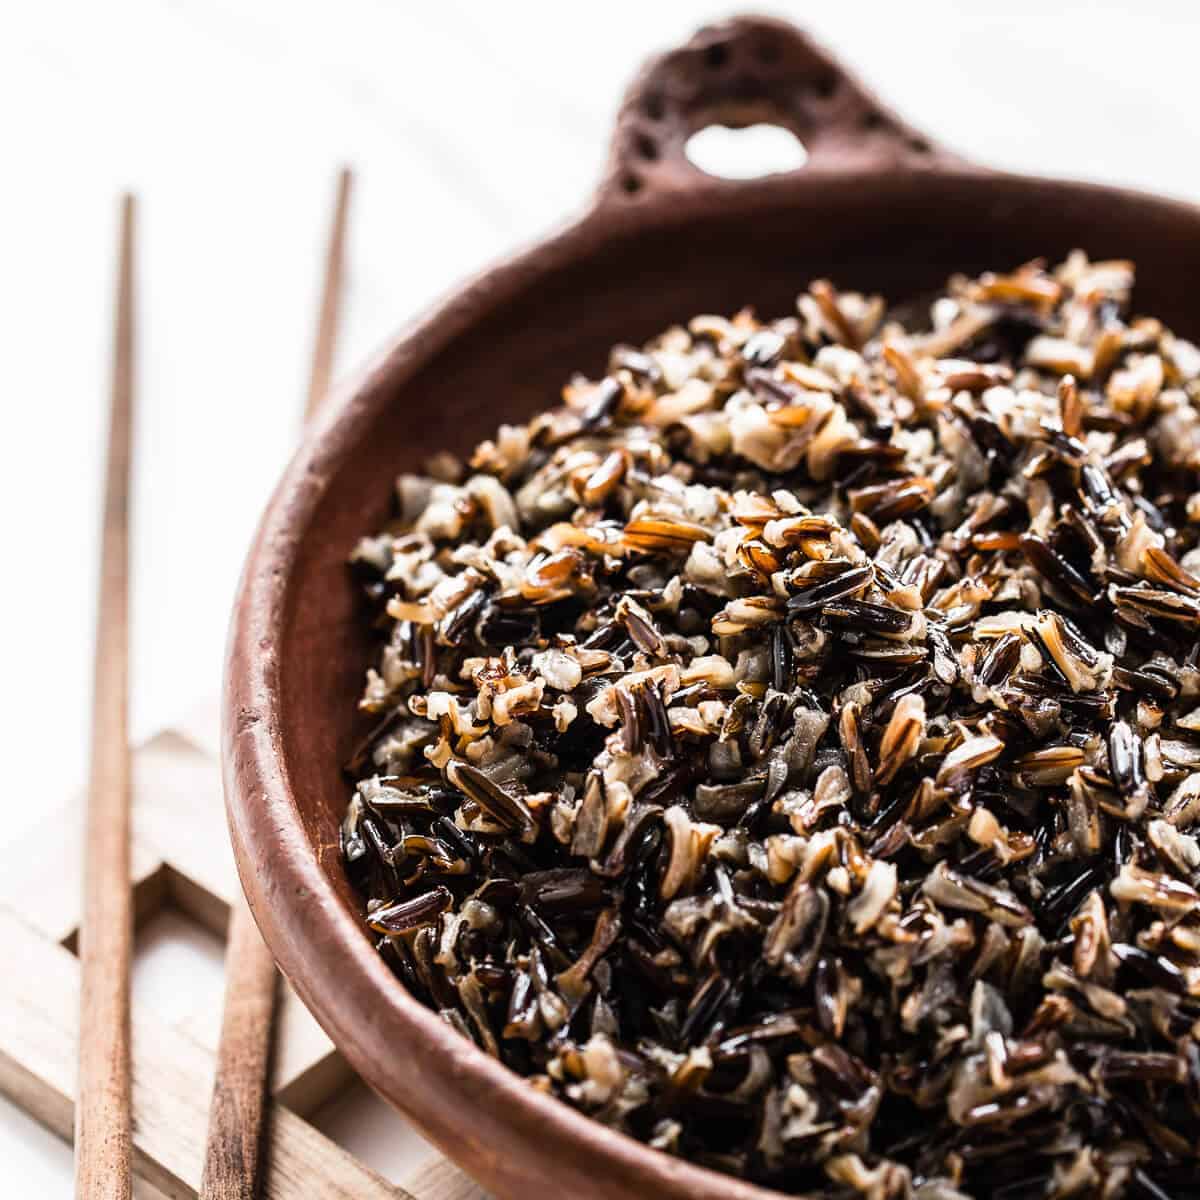 Cooked wild rice in a brown bowl on a wooden table.